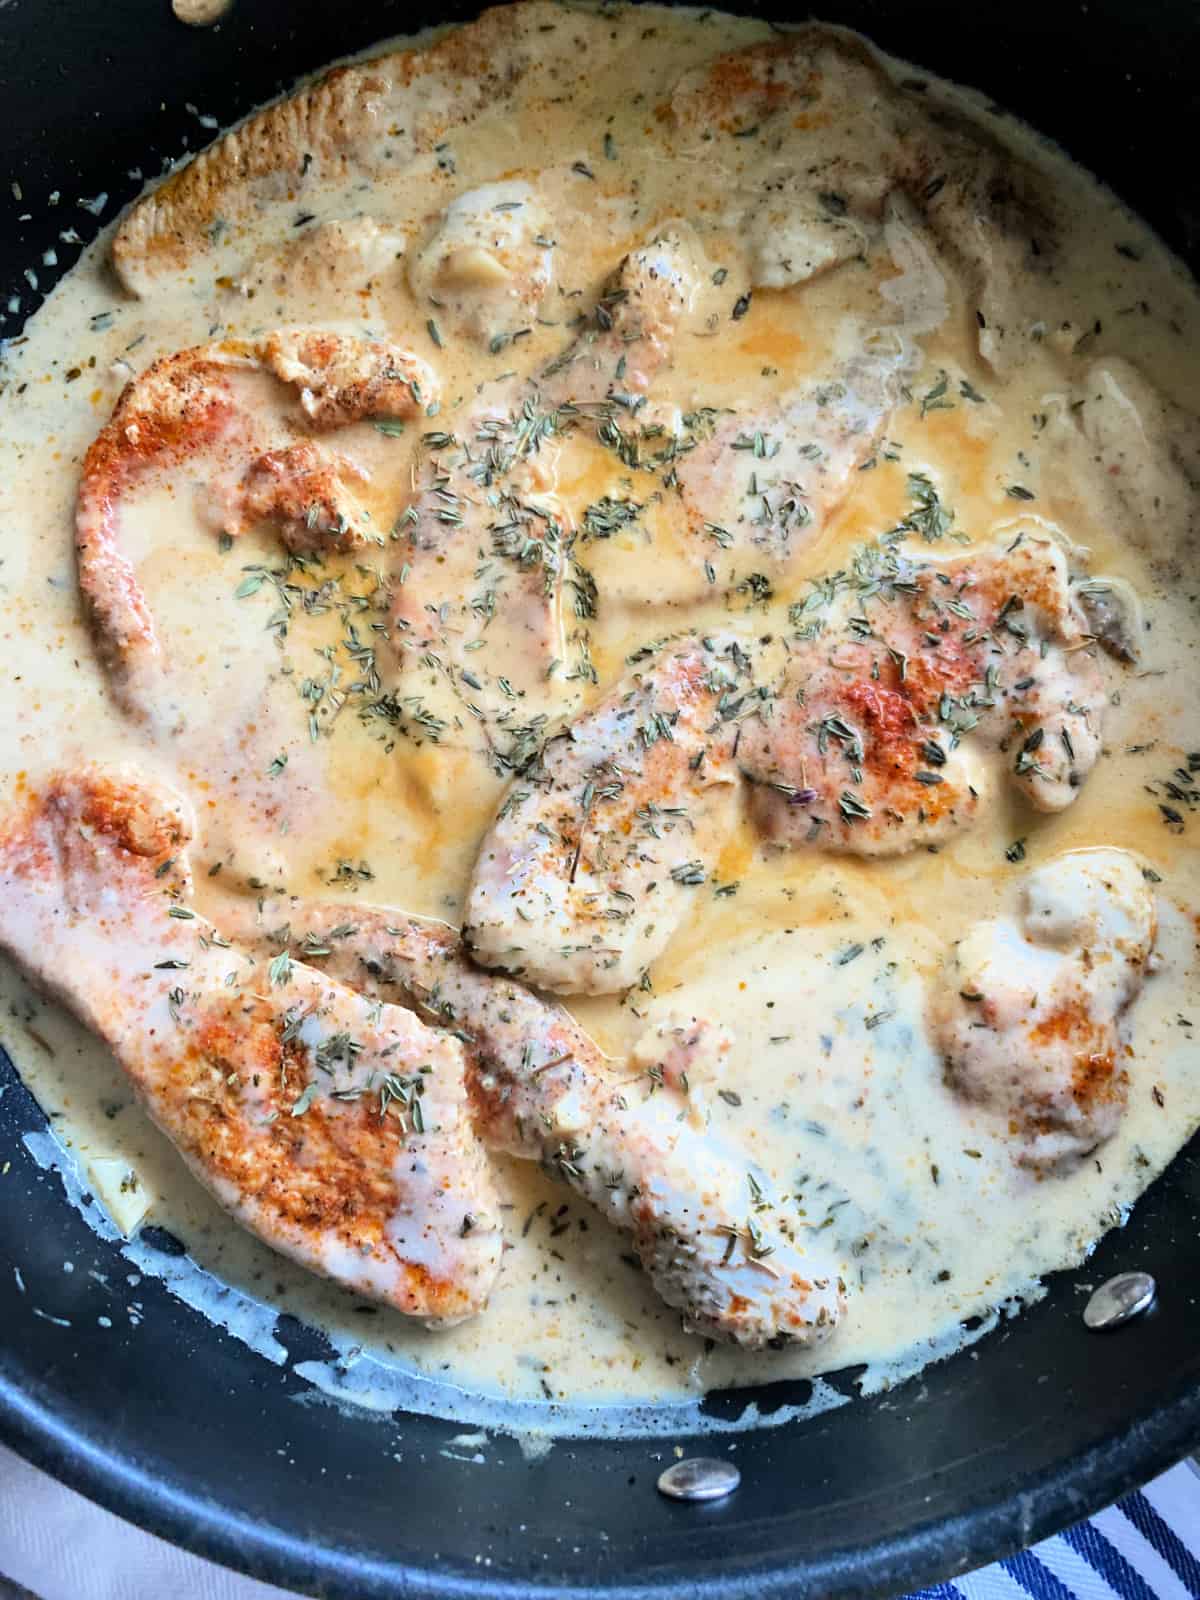 Turkey breast cutlets with a cream sauce in a pan.